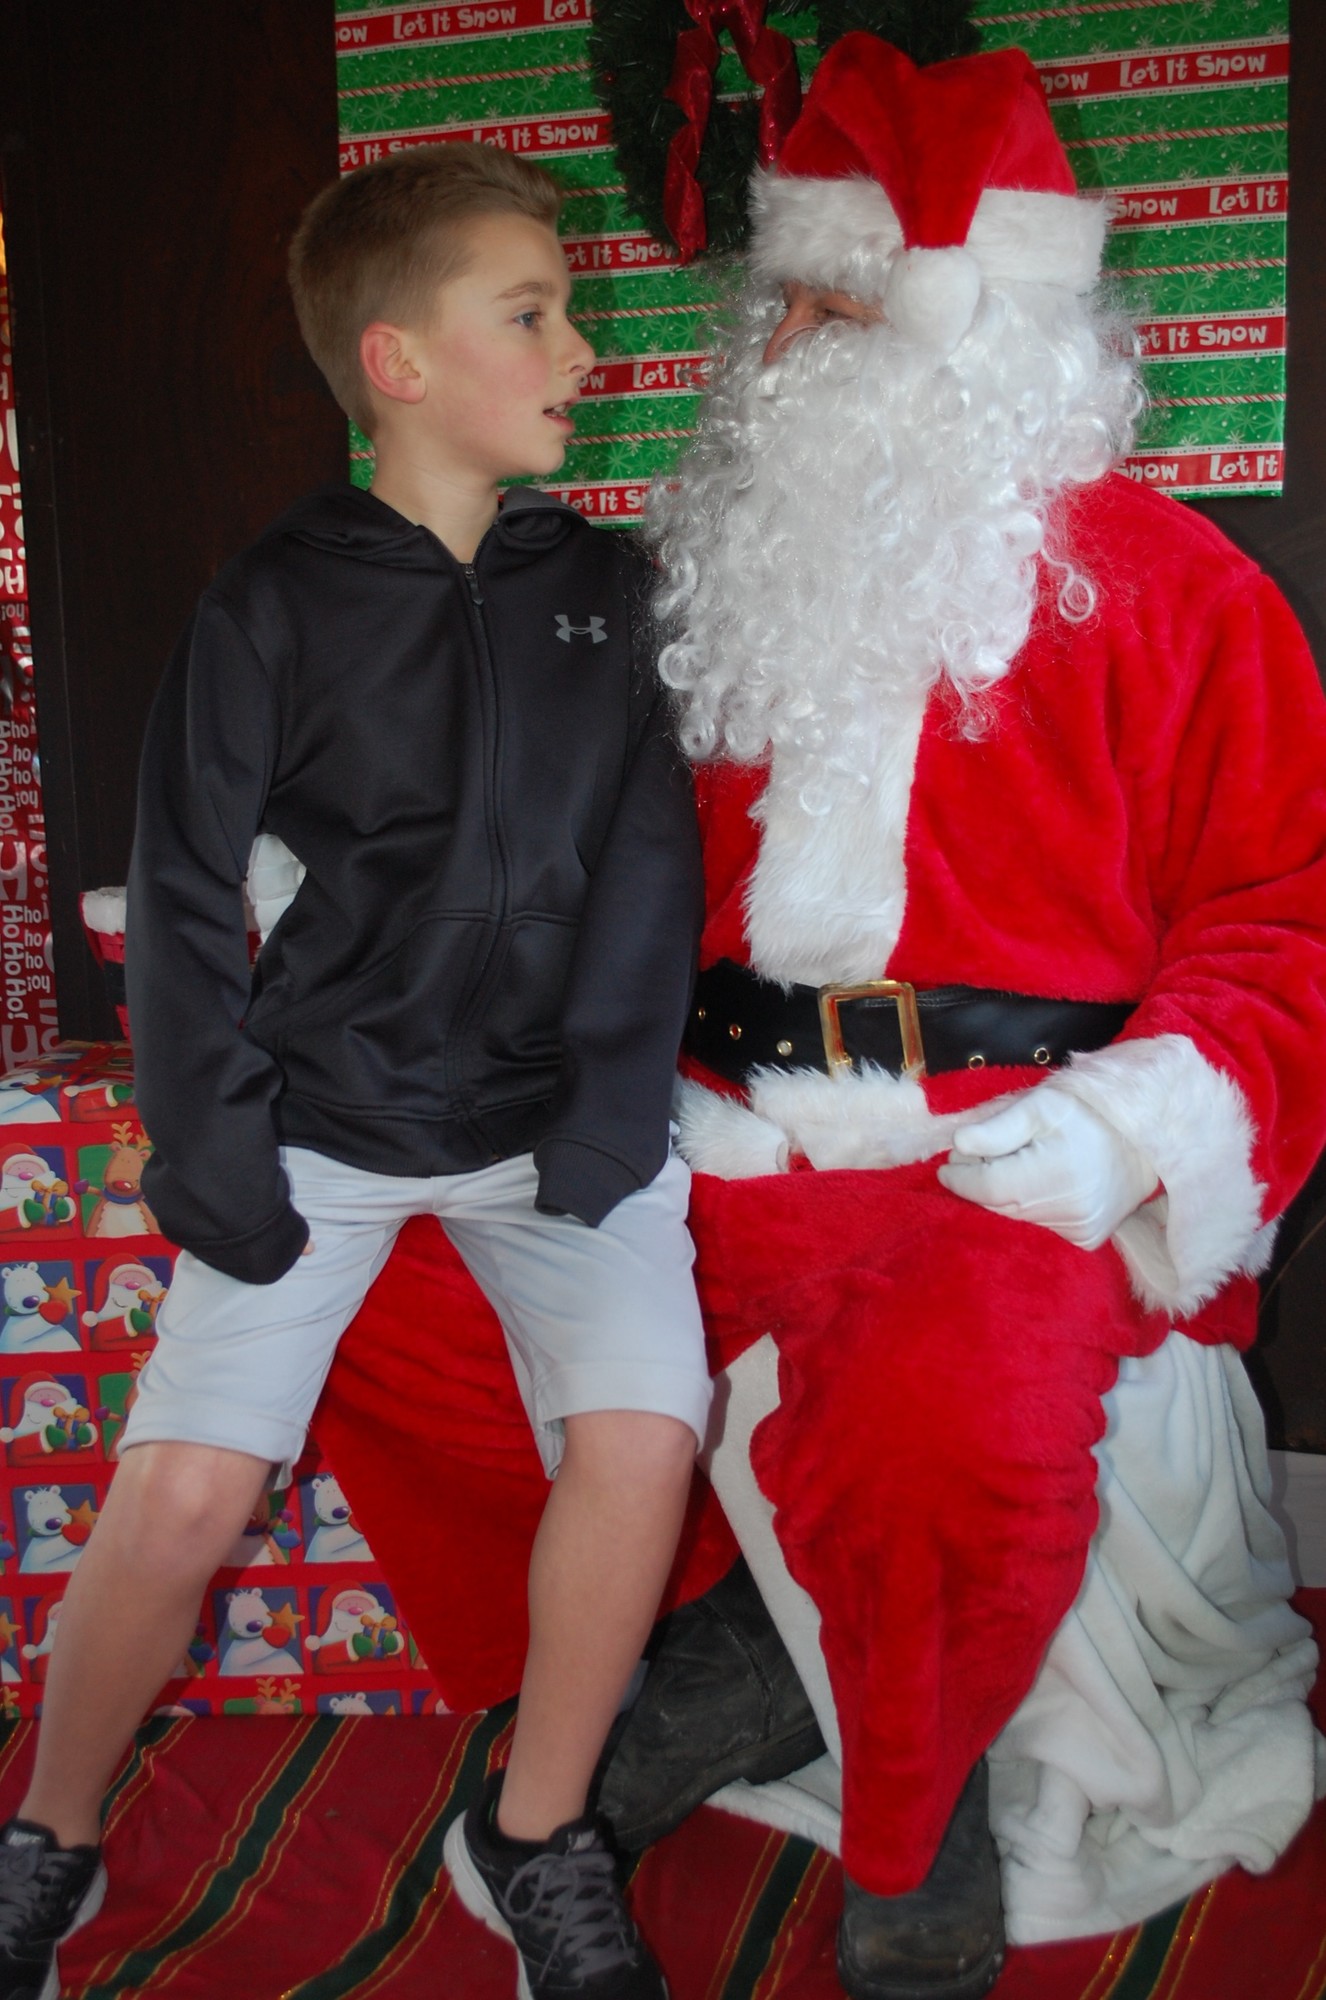 Matthew McCoy, 10, in slightly out-of-season clothing, visited Santa in the historic train car during the Wantagh Preservation Society’s holiday open house on Dec. 14.